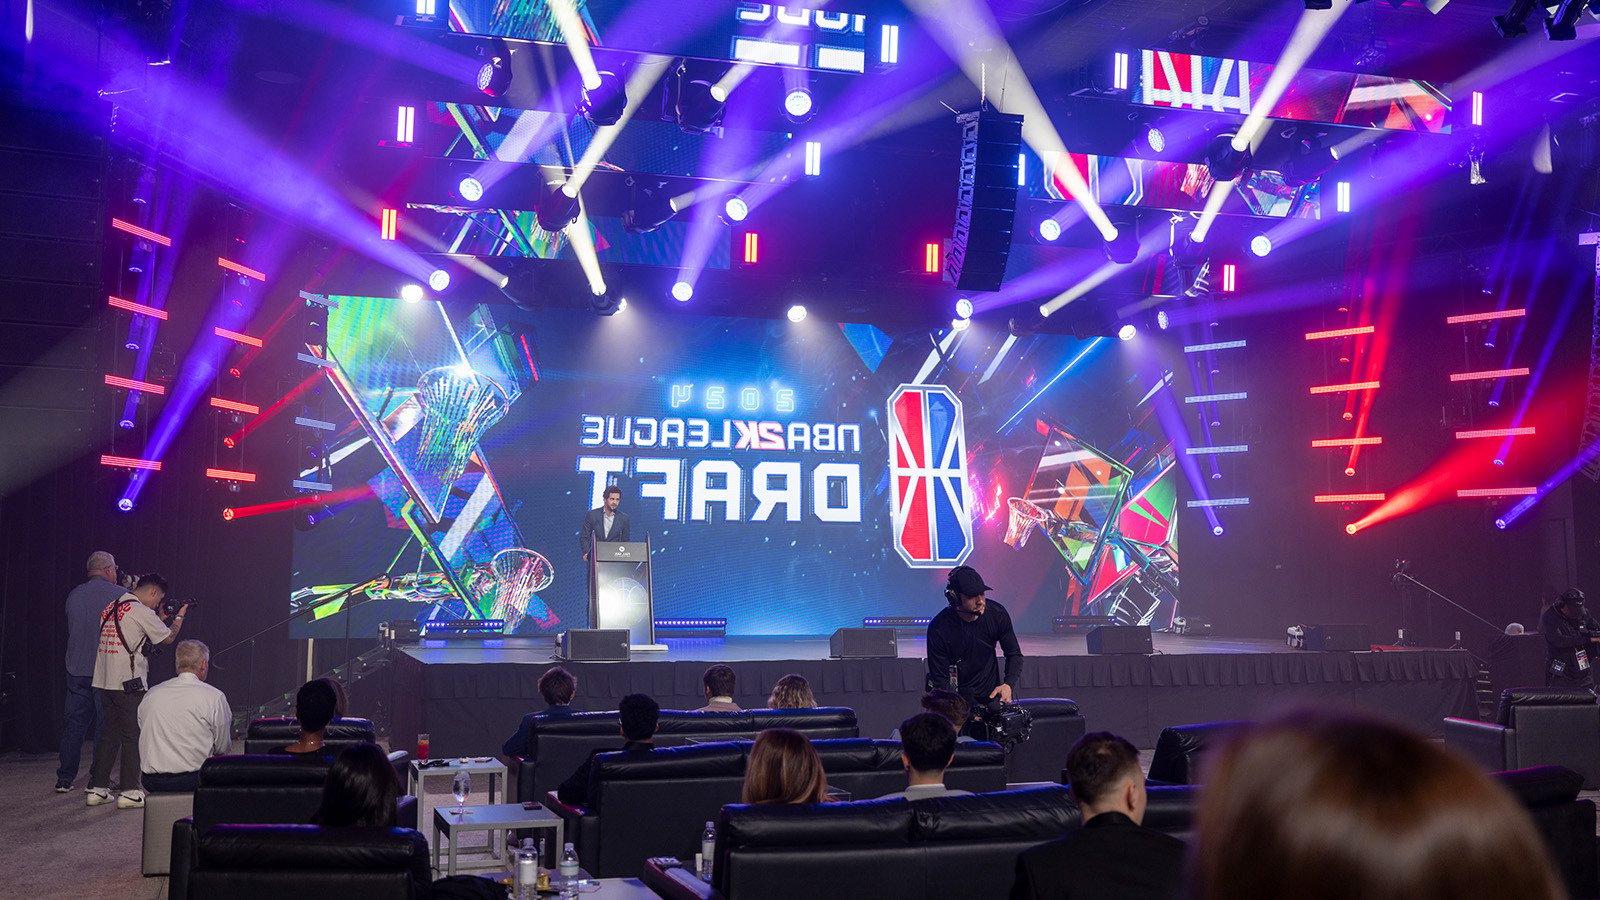 NBA 2 k 联盟 CEO Andrew Perlmutter on stage in front of a large screen featuring the NBA 2 k 联盟 Draft logo.